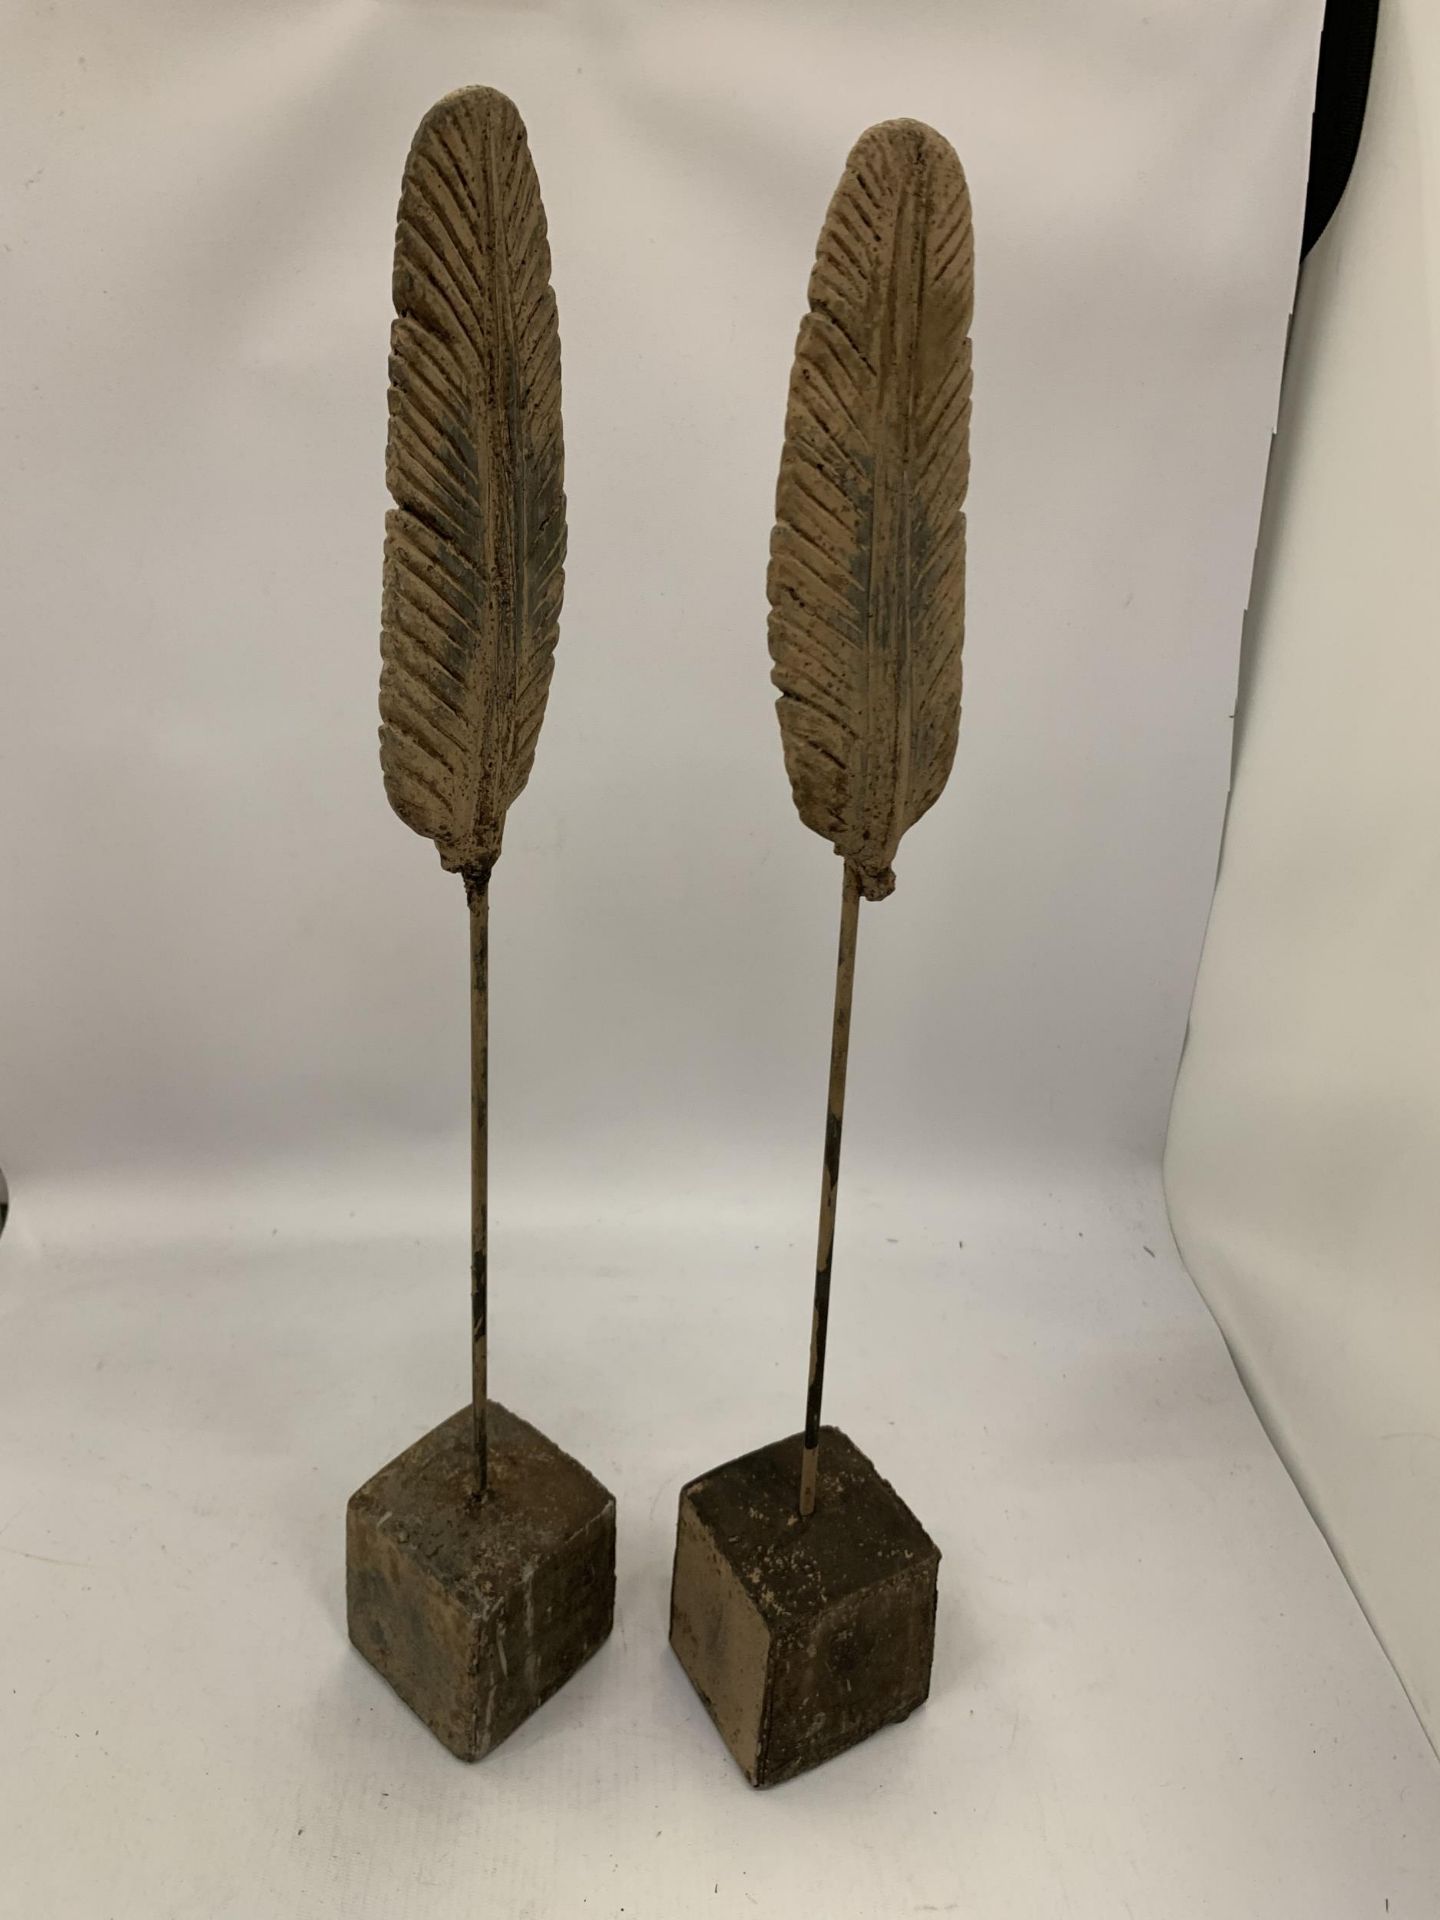 A PAIR OF DECORATIVE STONE FEATHERS ON STANDS